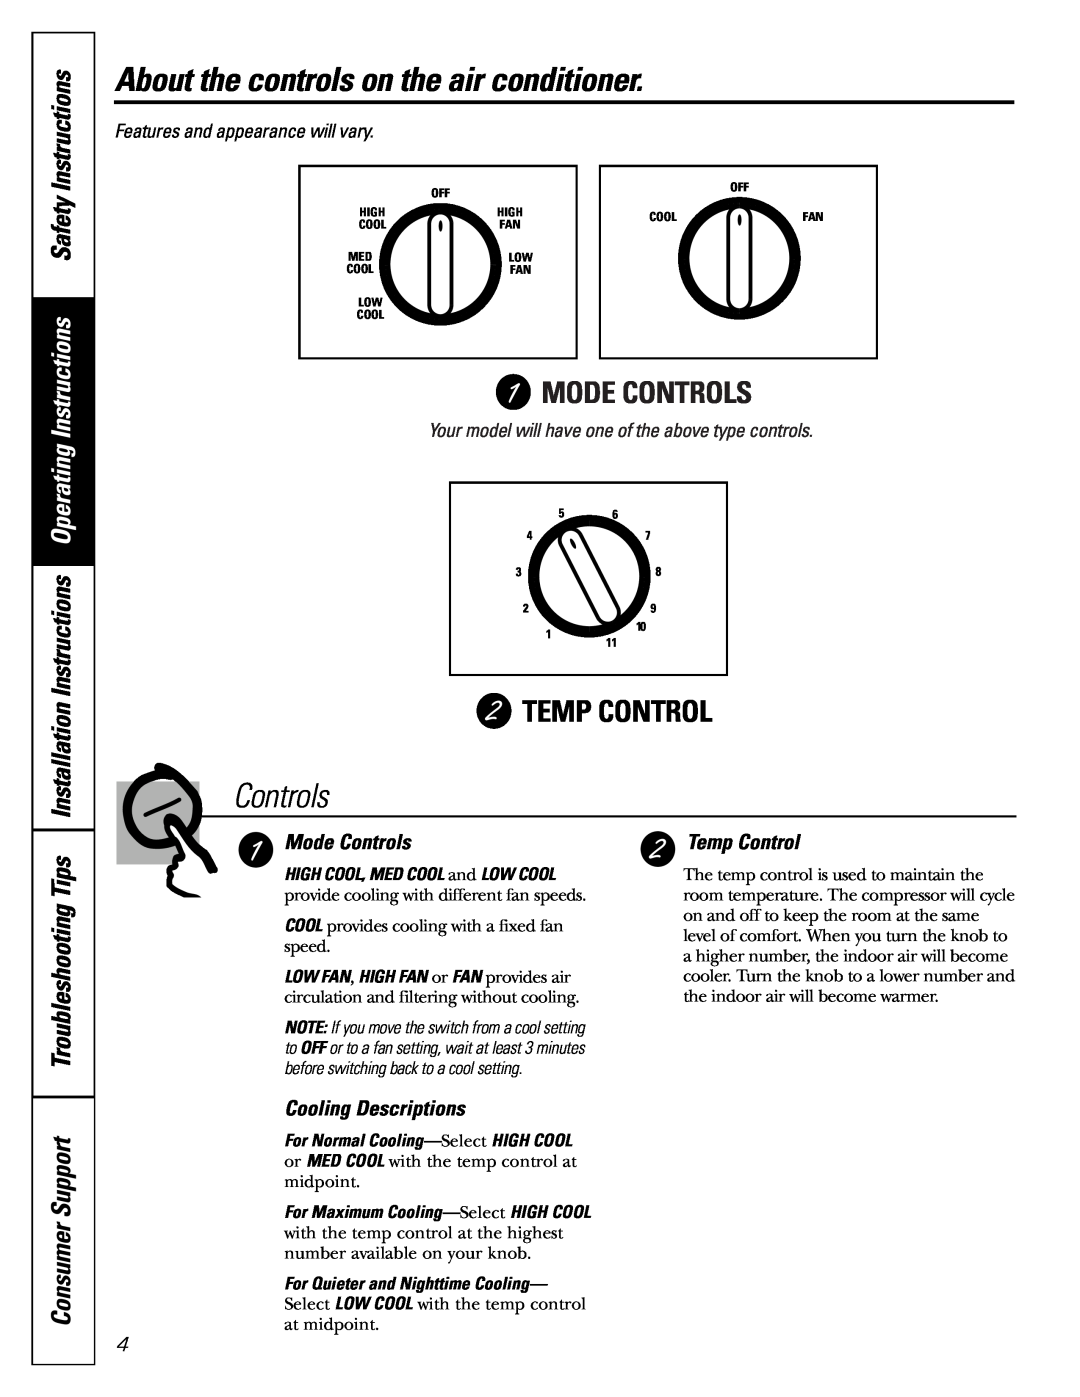 GE AKV05 About the controls on the air conditioner, Consumer Support Troubleshooting Tips, Mode Controls, Temp Control 